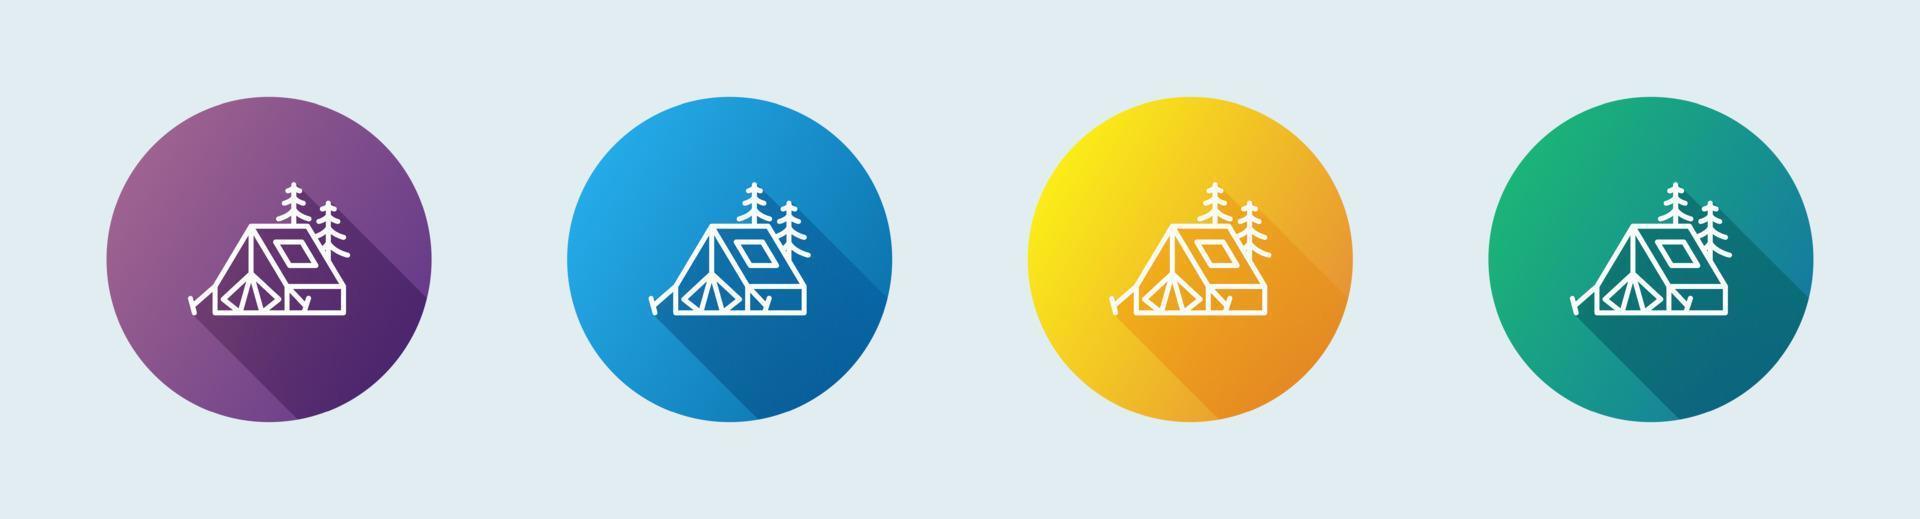 Tent line icon in flat design style. Camping signs vector illustration.